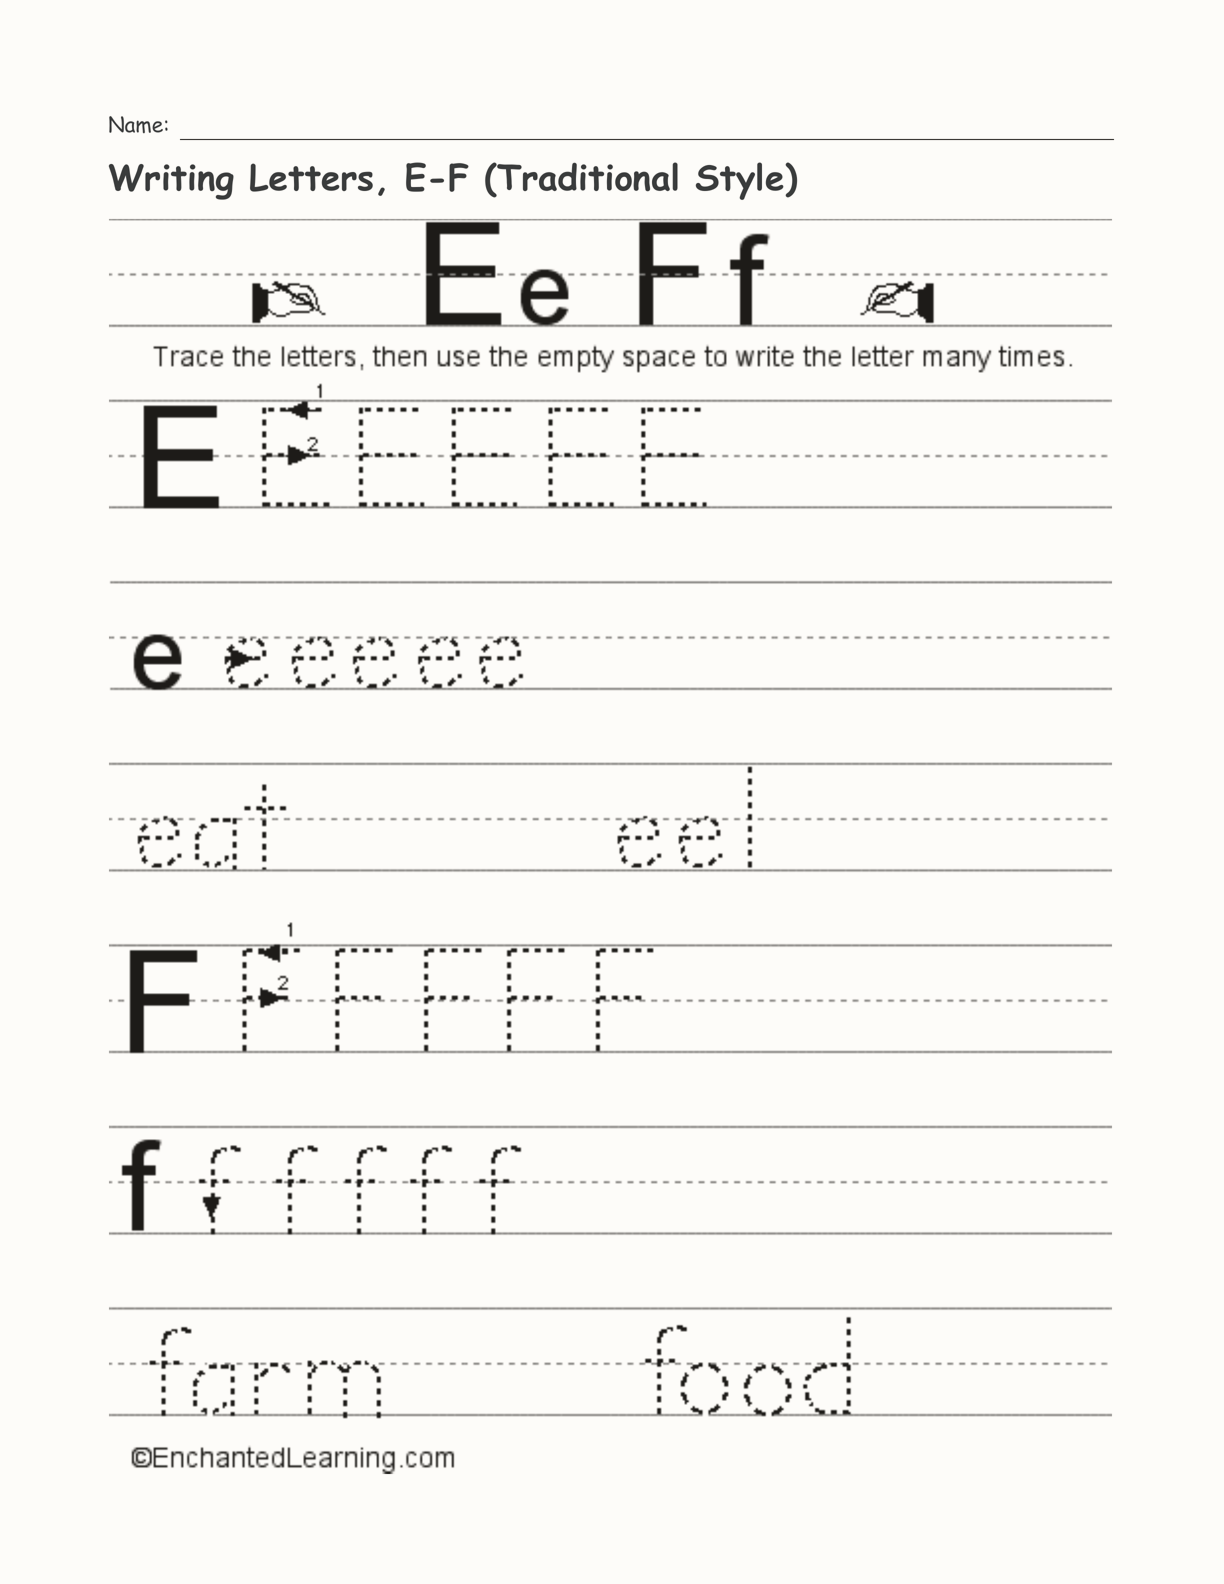 Writing Letters, E-F (Traditional Style) interactive worksheet page 1